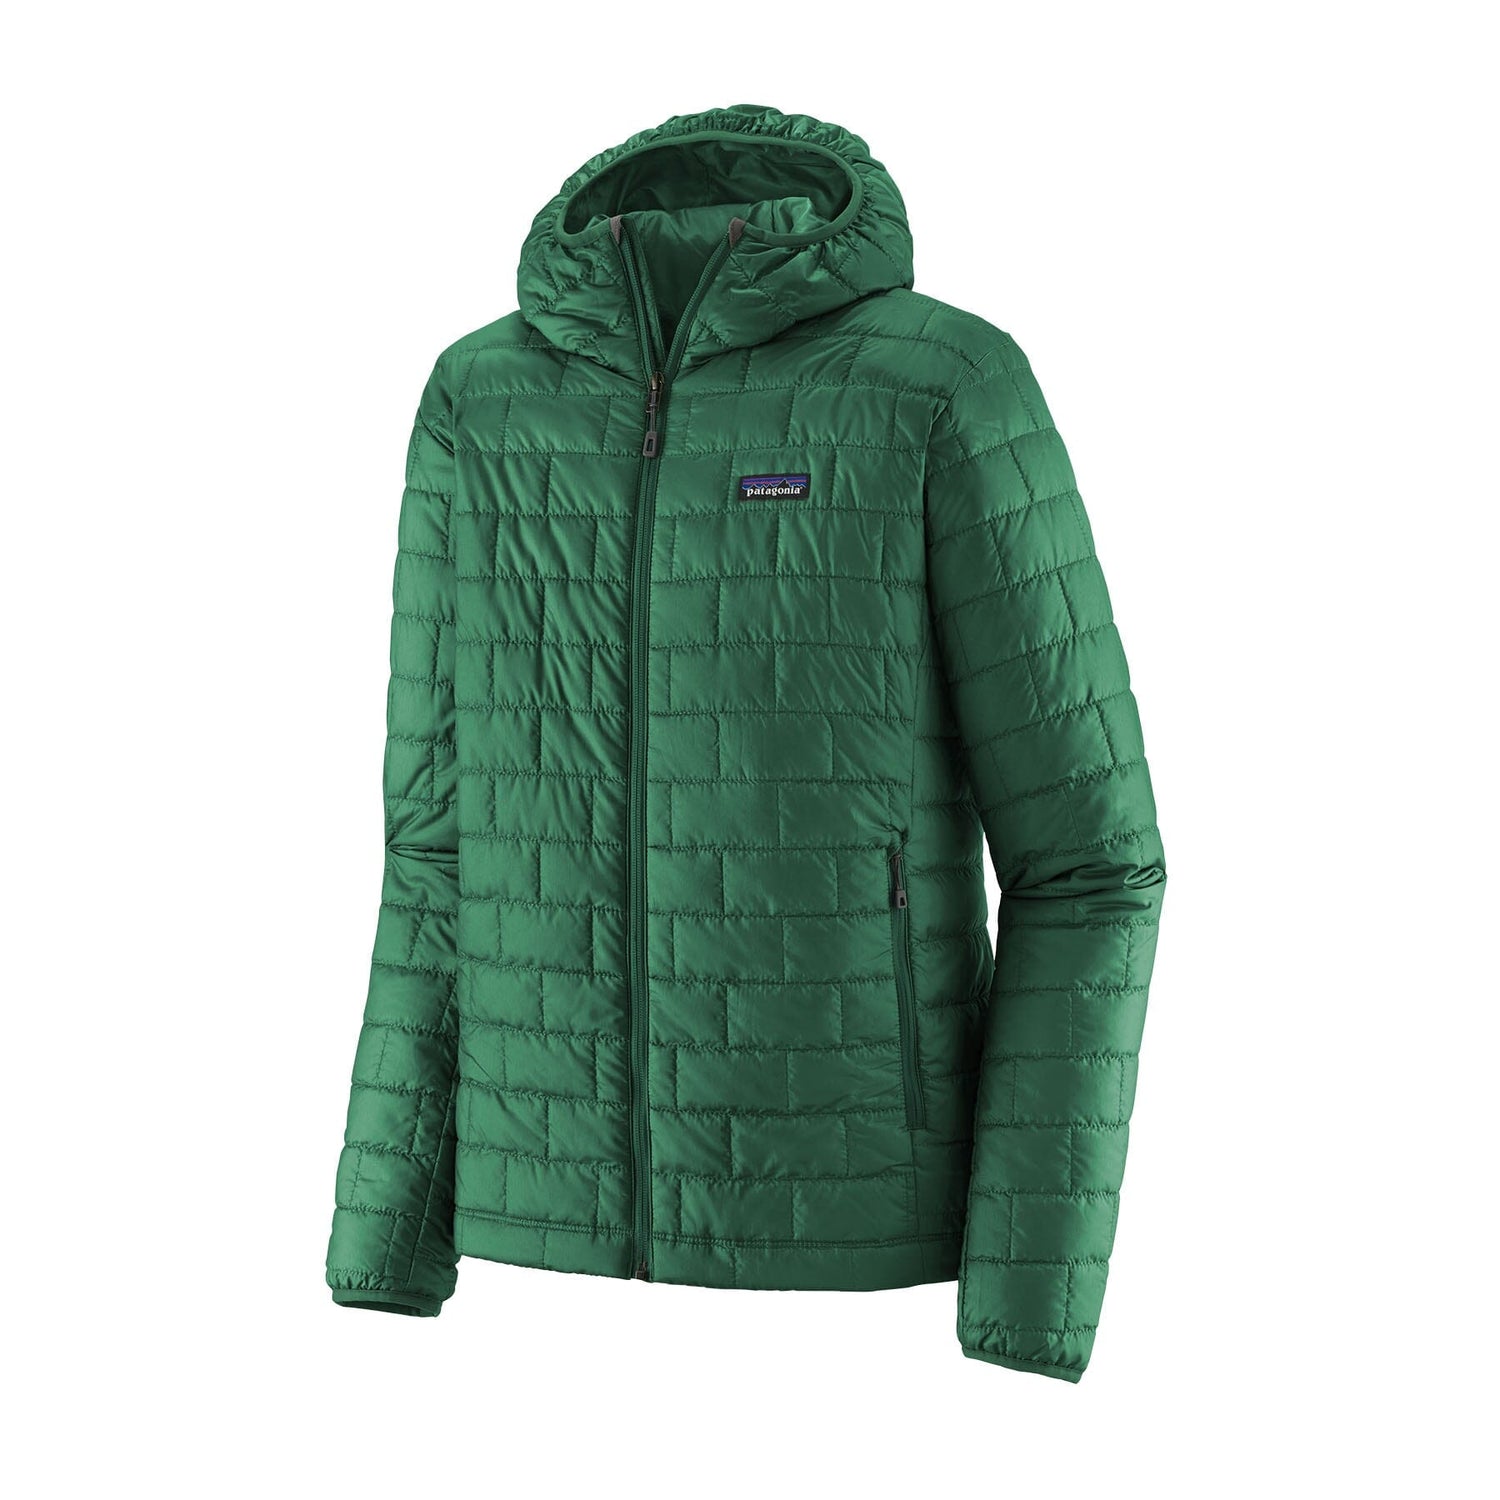 Patagonia M's Nano Puff Hoody - 100% Recycled Polyester Conifer Green Jacket